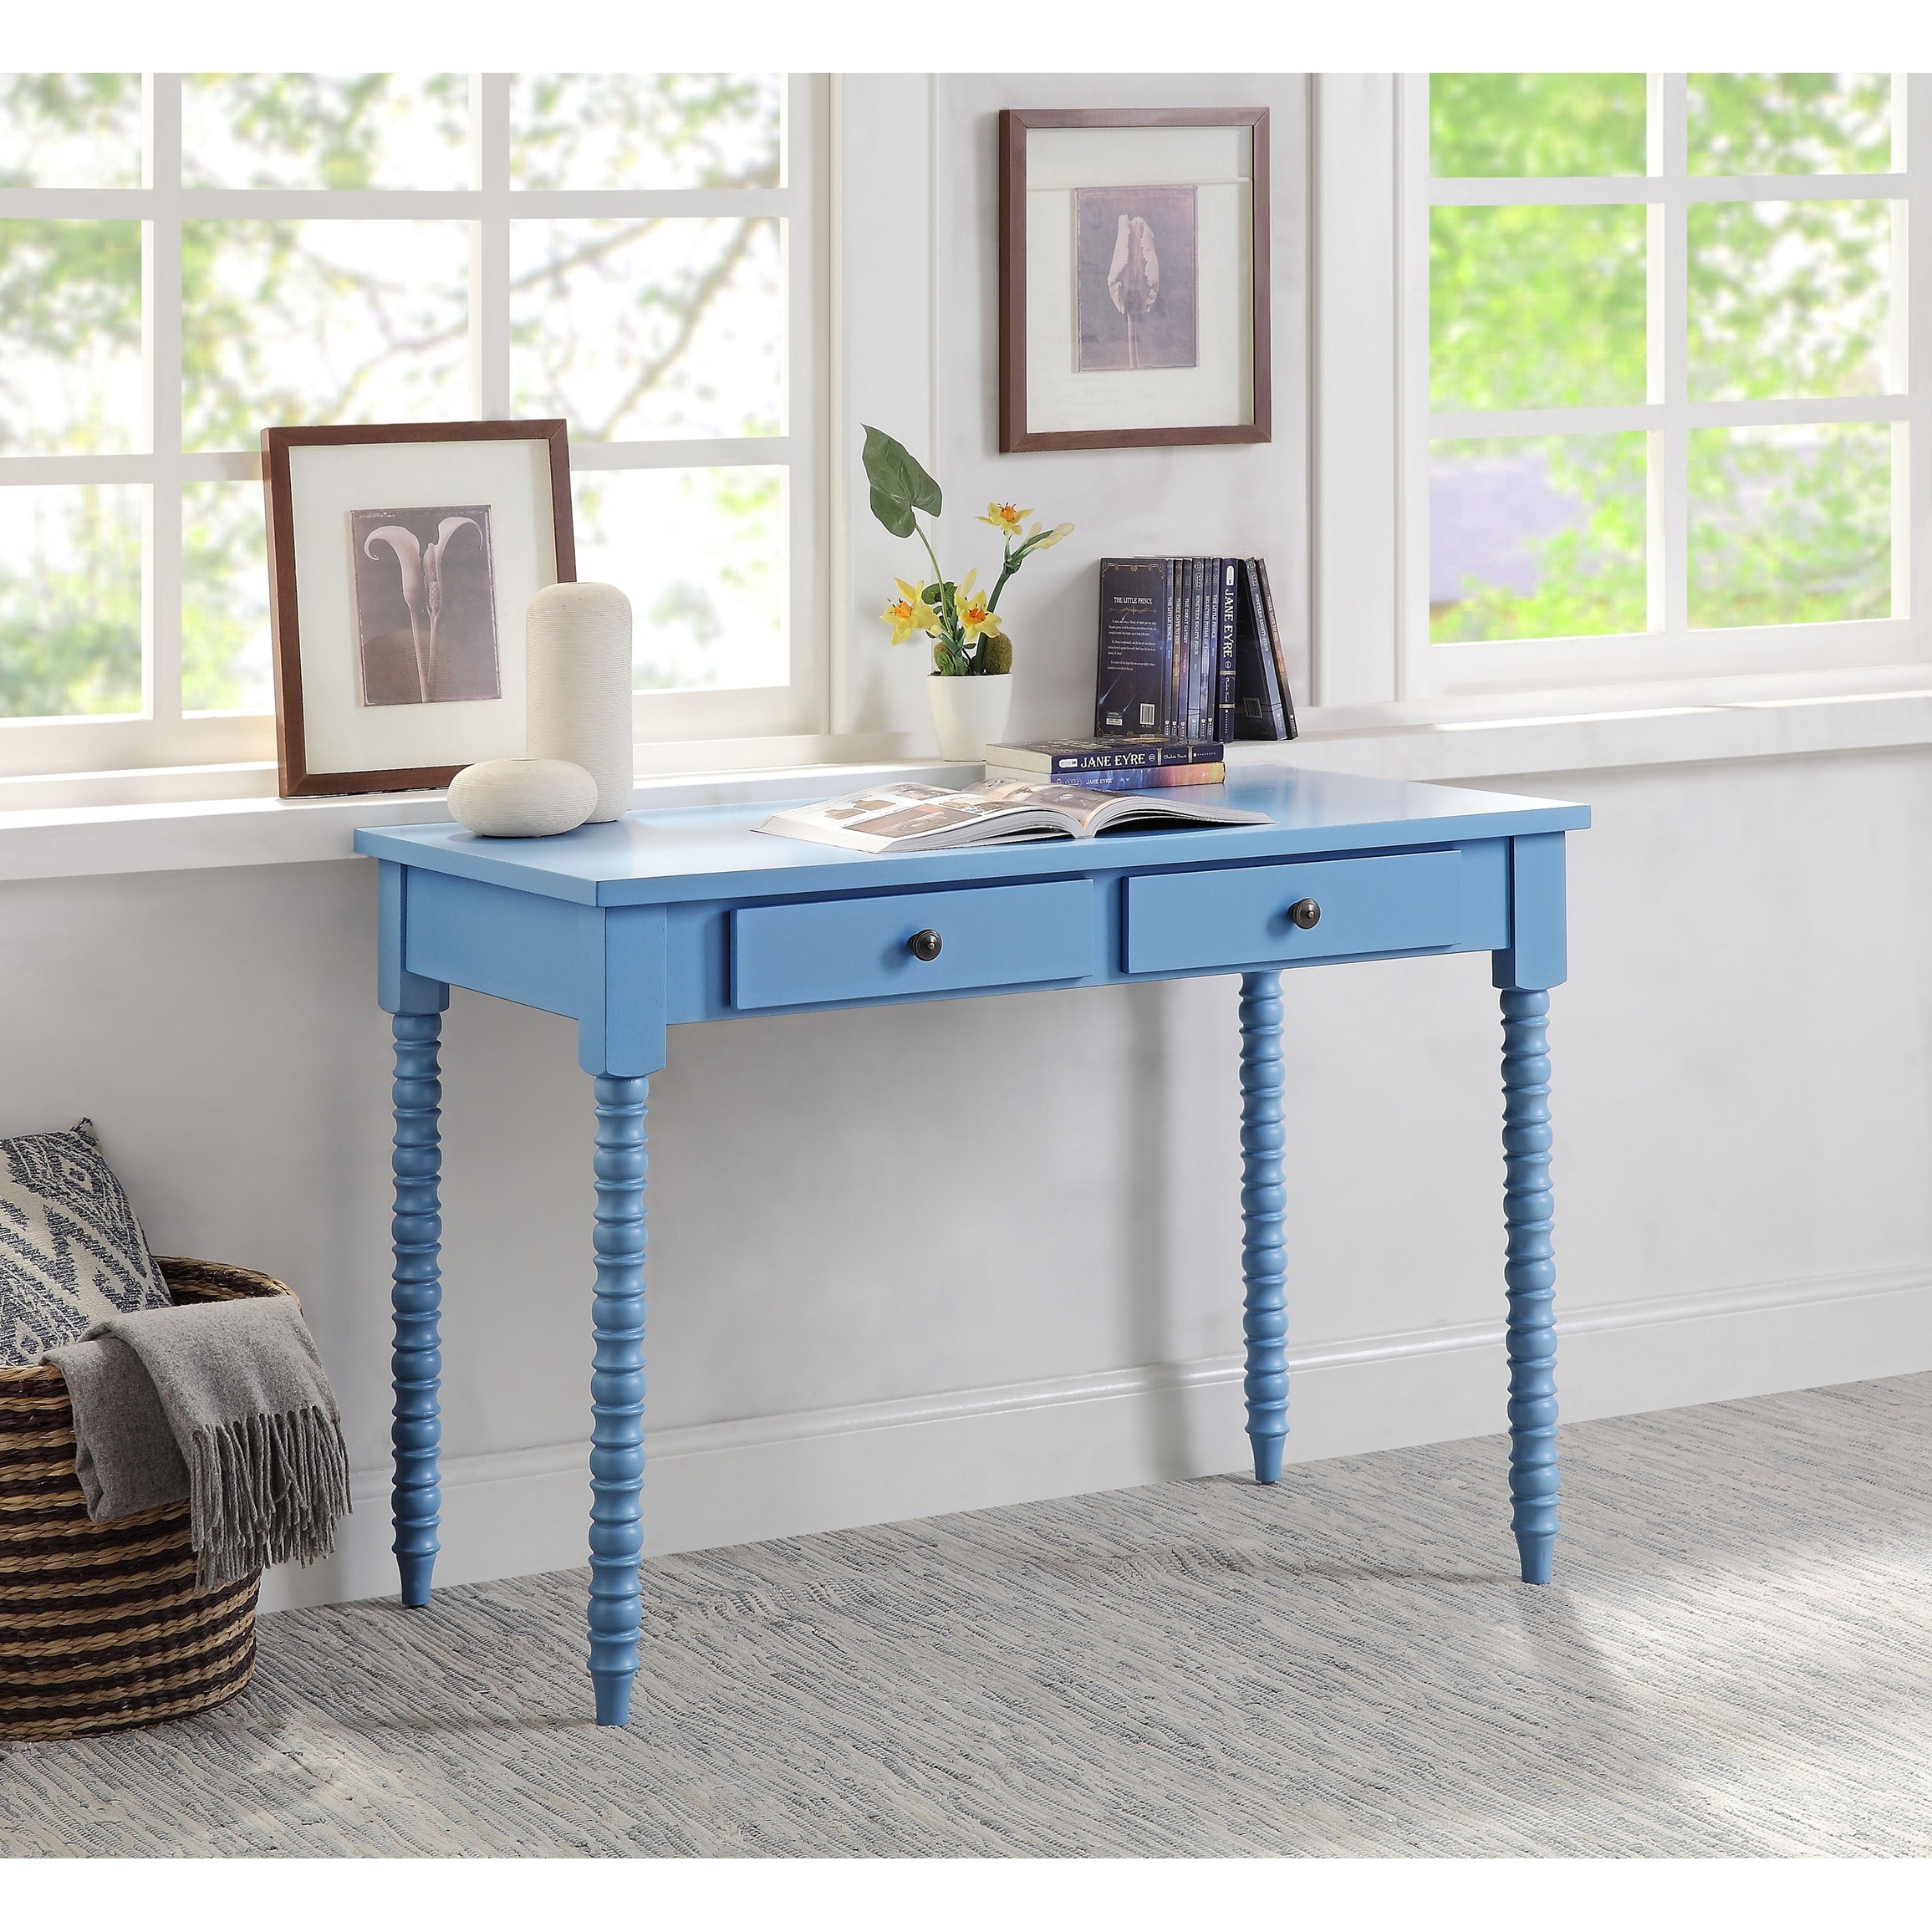 ACME Altmar Writing Desk in Blue - image 5 of 5